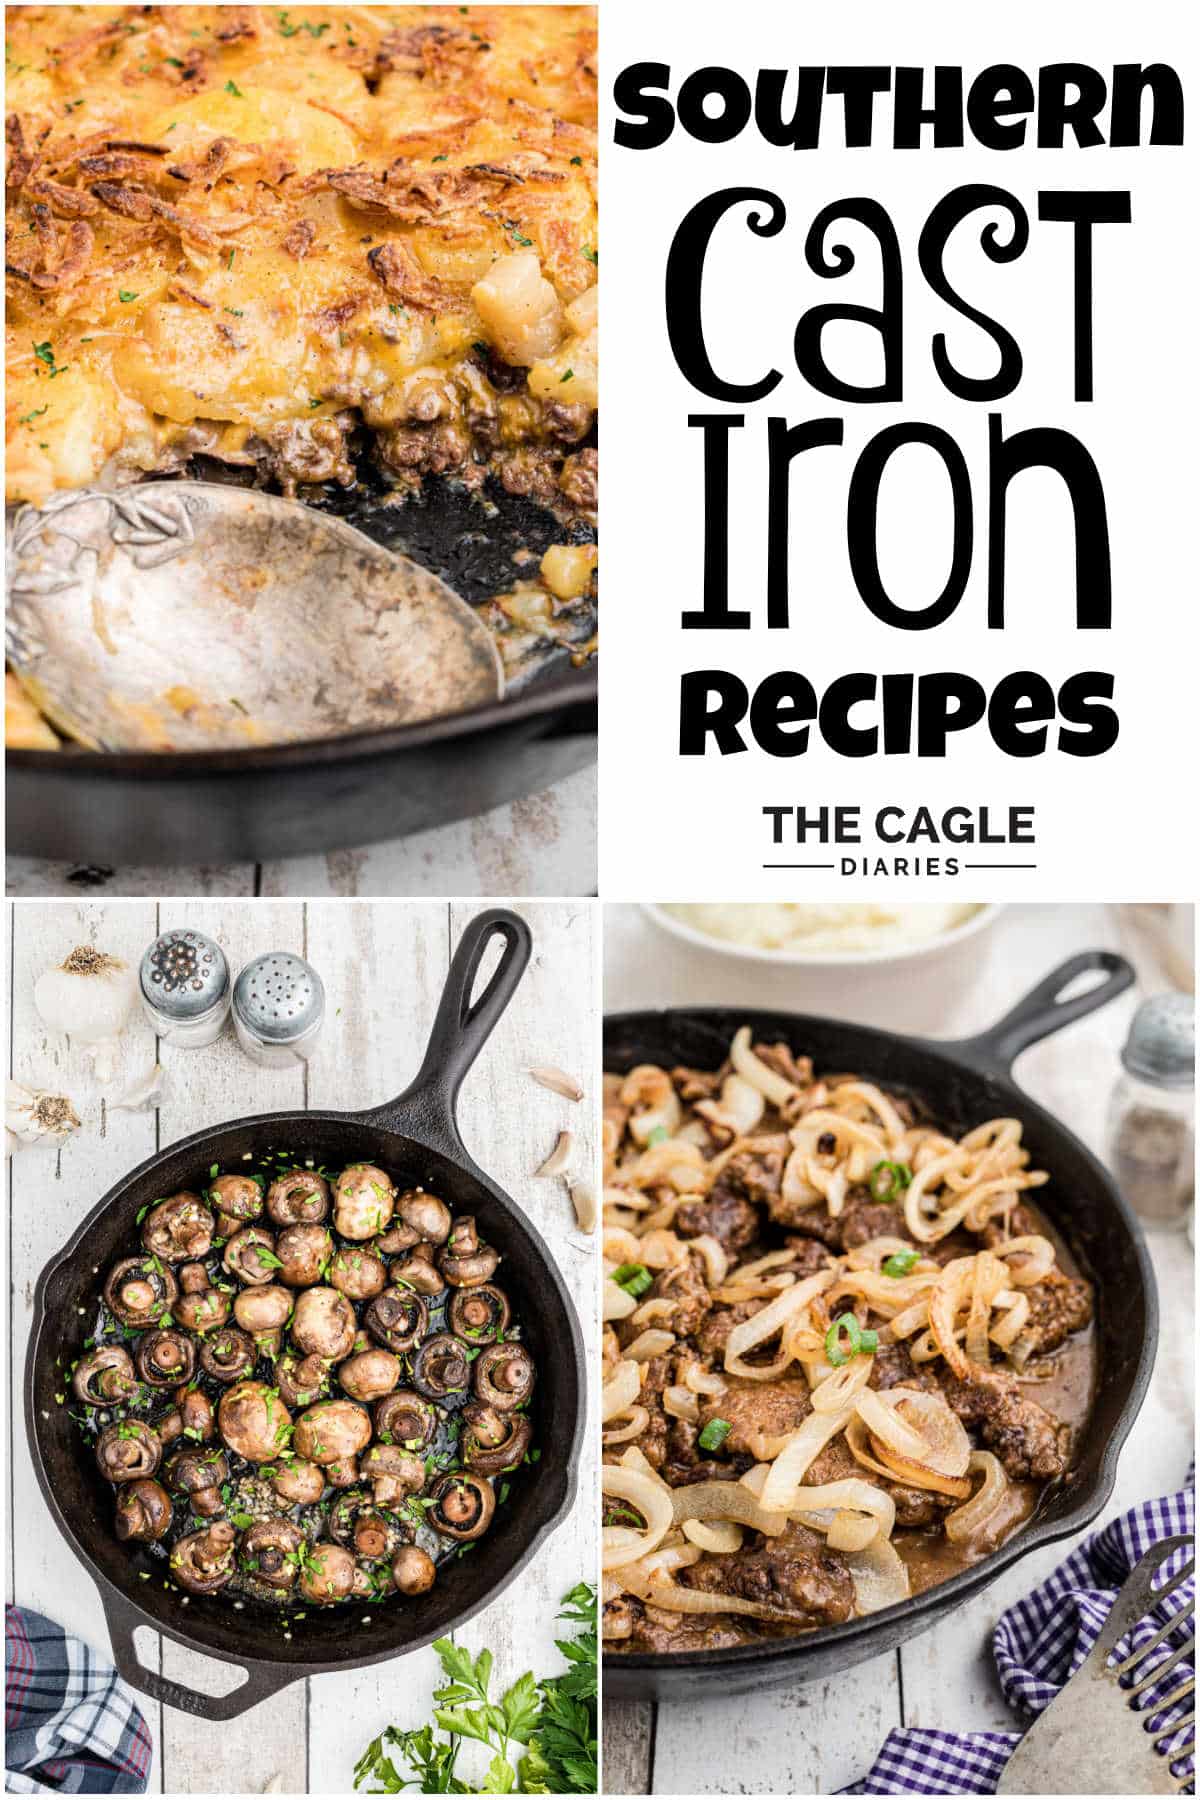 A collage of three images plus a title showing southern cast iron recipes.